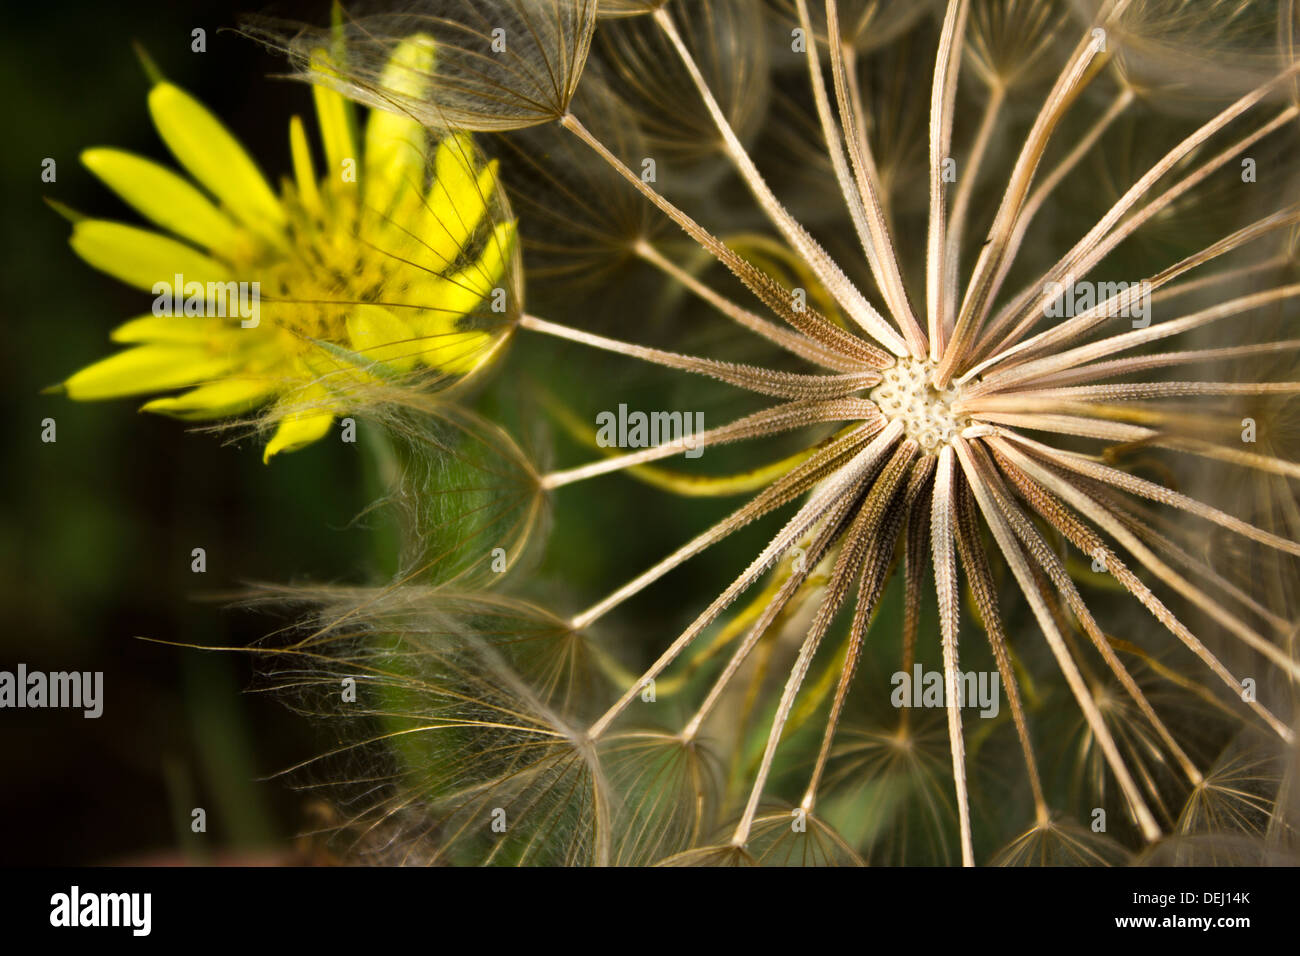 Yellow Goat's Beard Noxious Weed Blossom & Seed Head (Tragopogon dubius) Stock Photo